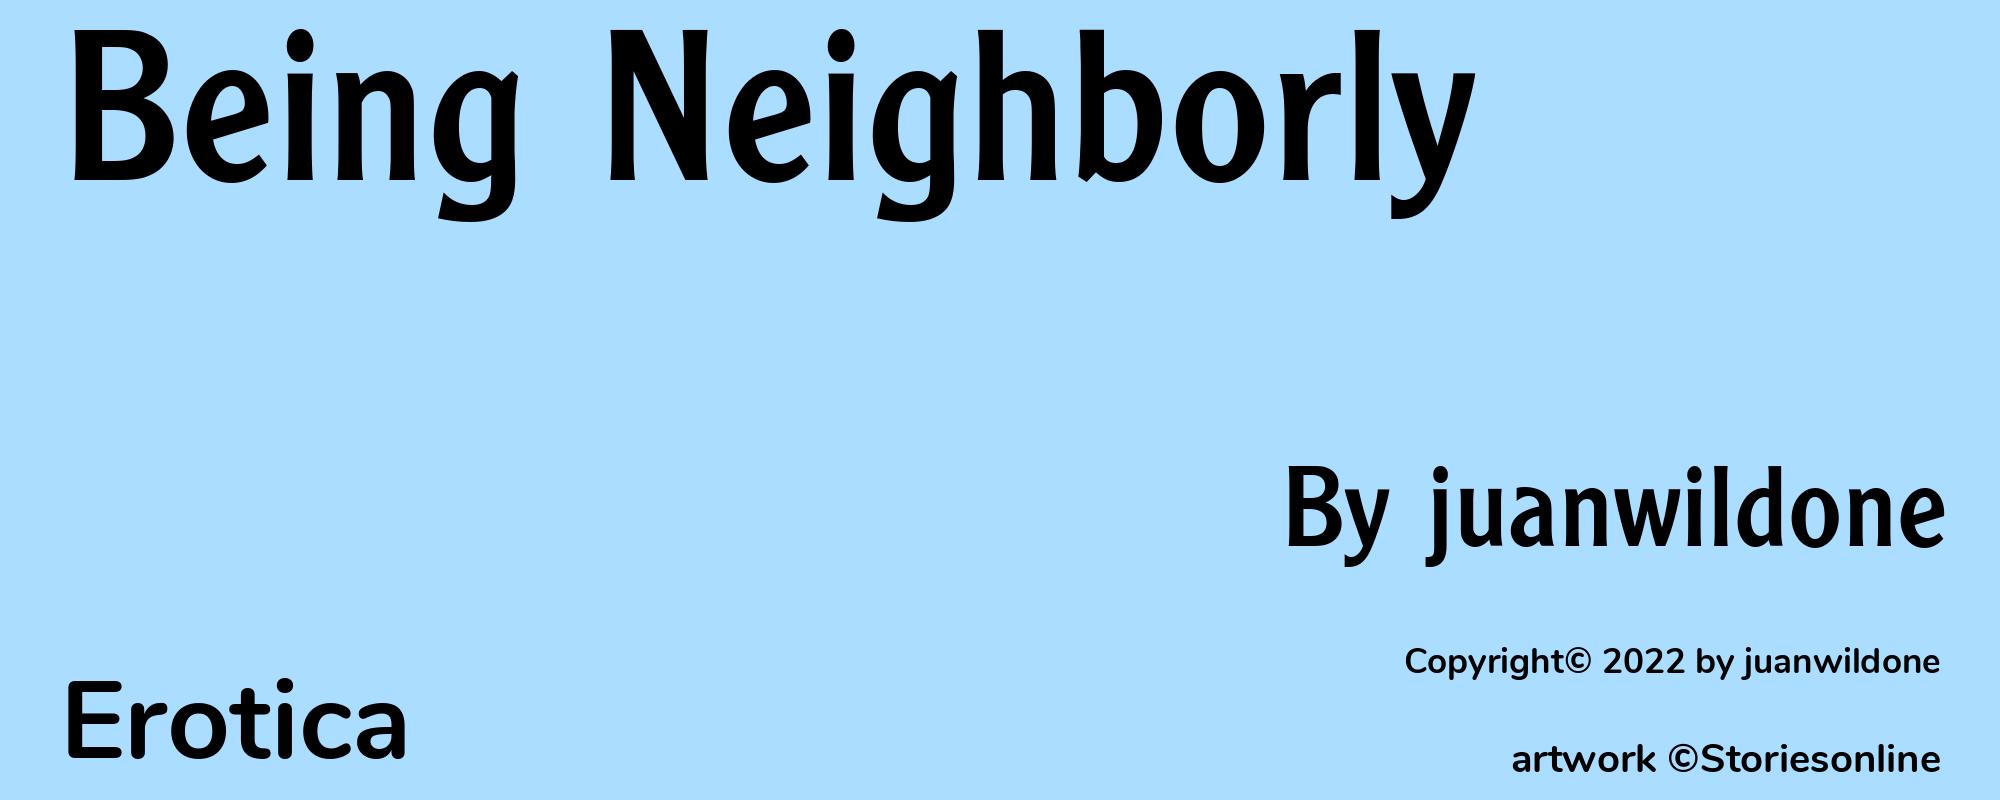 Being Neighborly - Cover